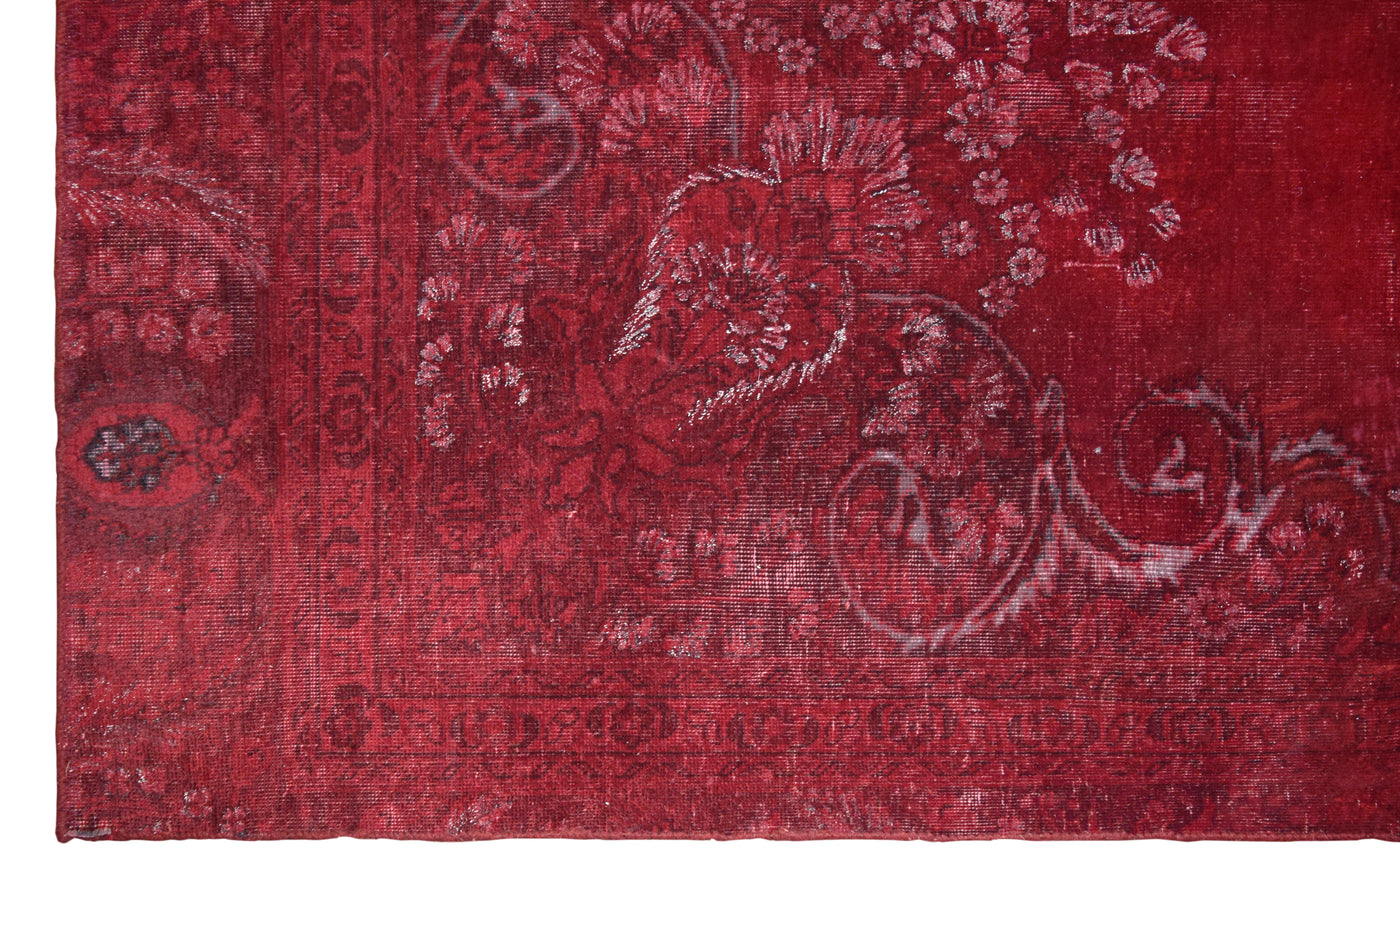 Second Life Red Rug